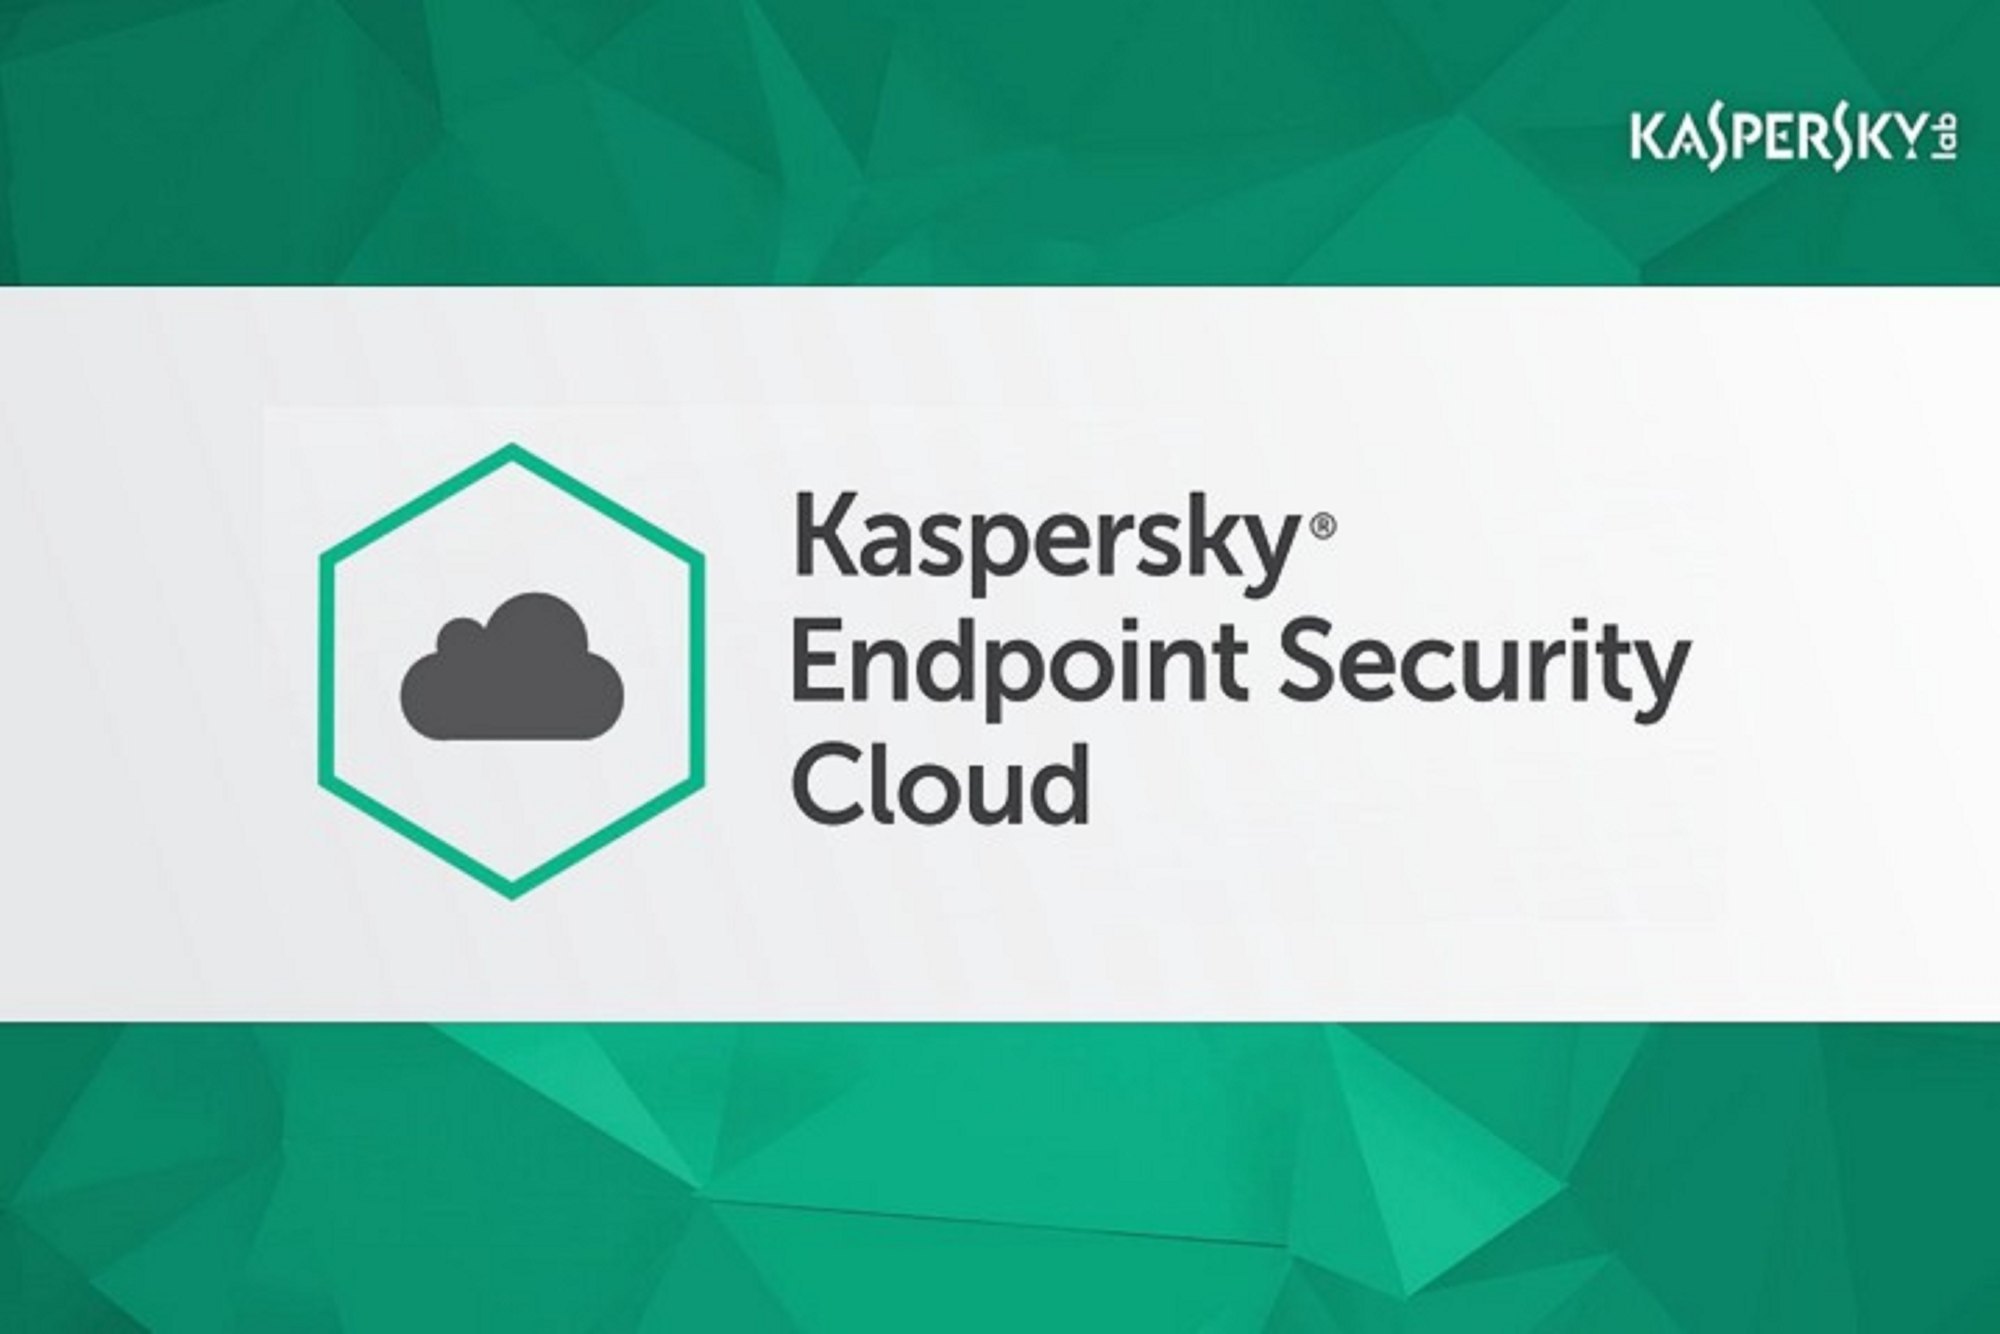 Kaspersky Cloud-Based Endpoint Security - Safeguarding Your Digital Environment